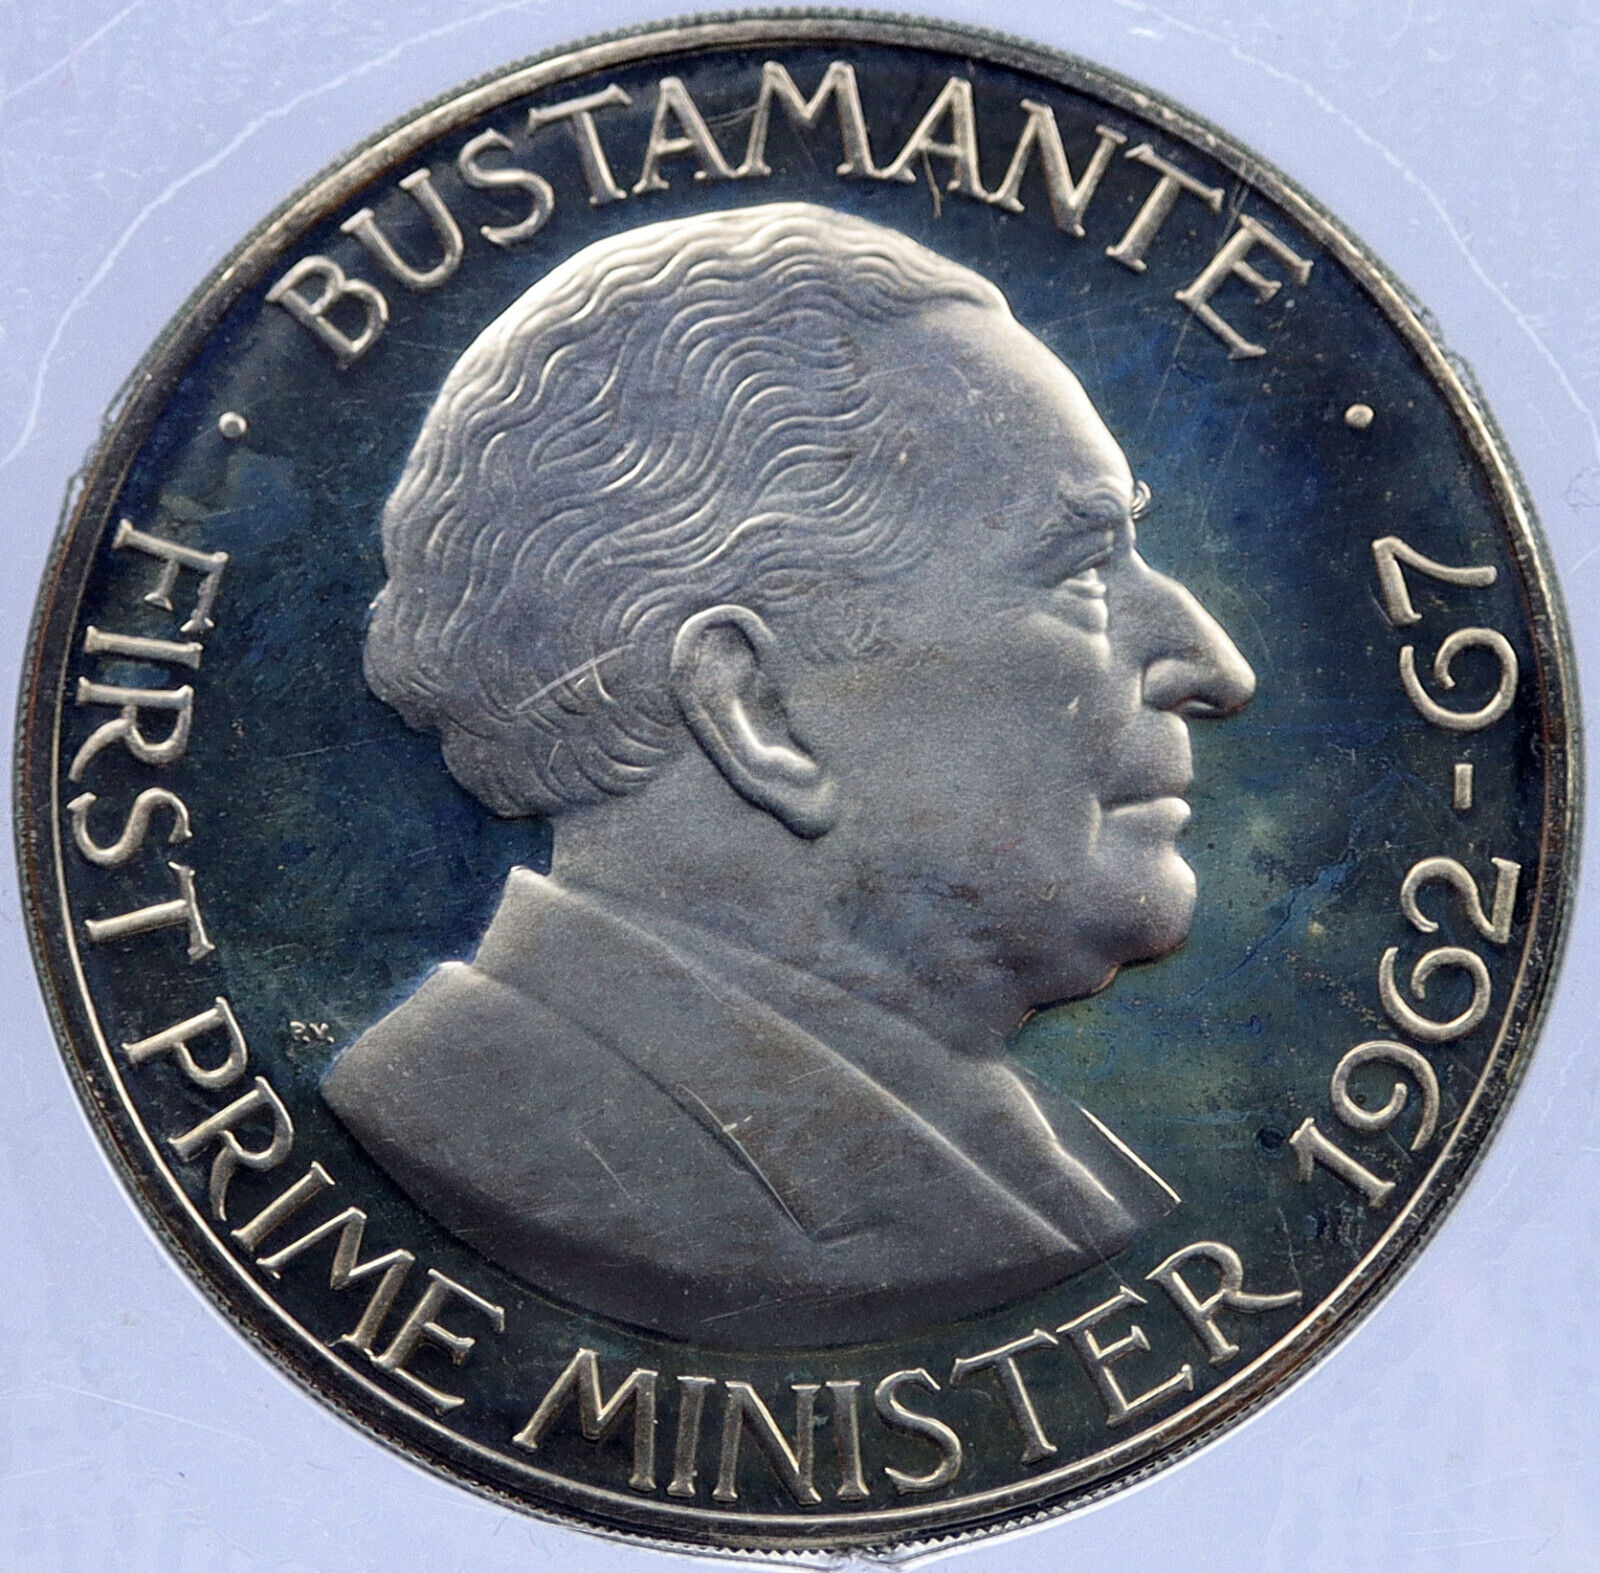 1974 JAMAICA First Prime Minister BUSTAMANTE Vintage Proof Dollar Coin i117776